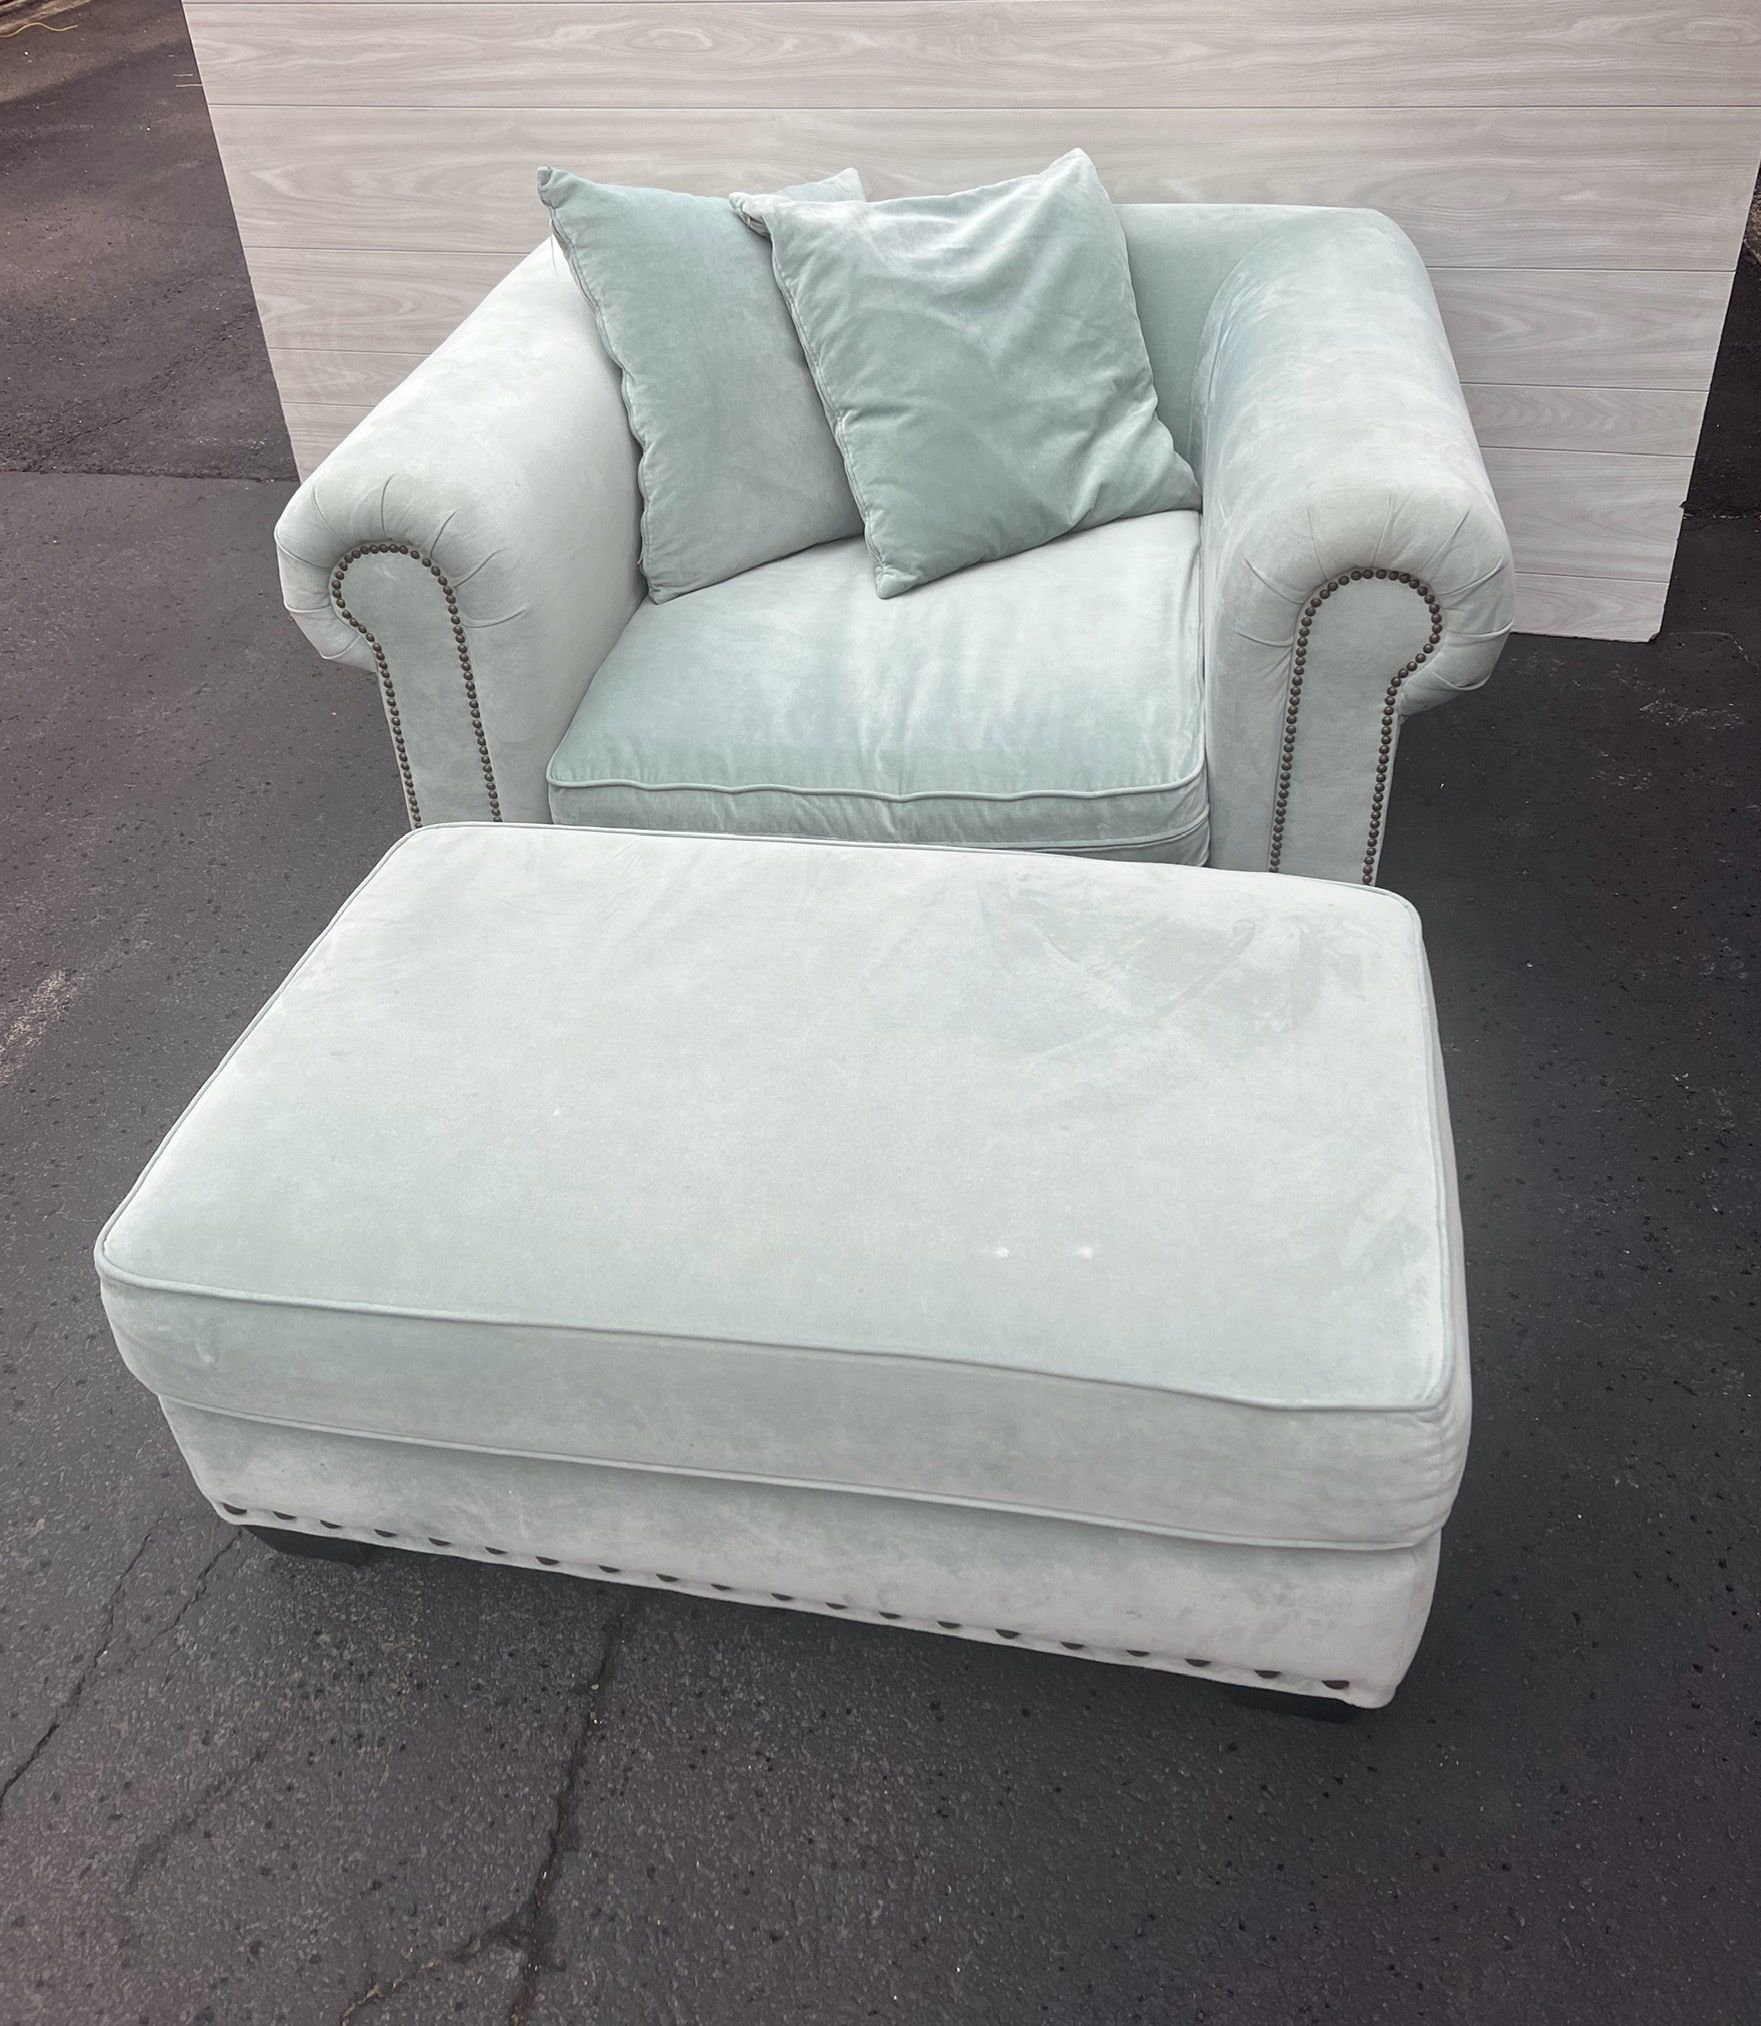 Large Comfy Chair With Matching Ottoman / Foot Rest With Matching Pillows